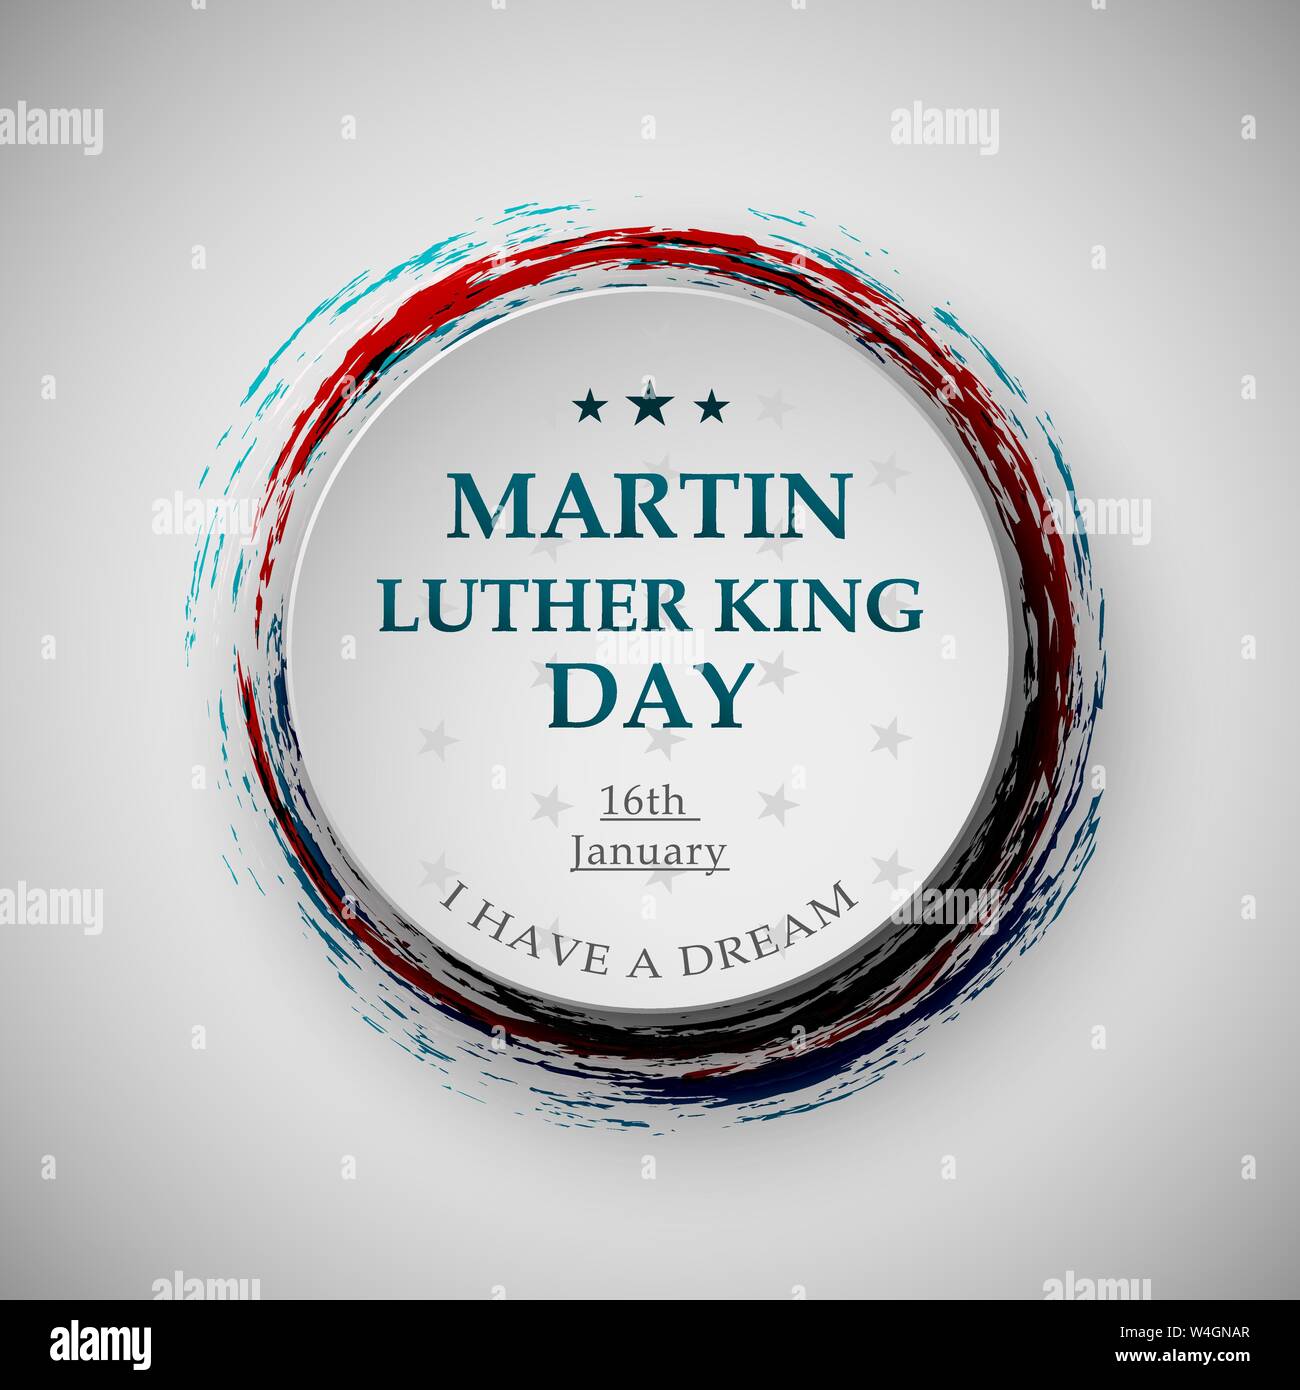 Martin Luther King day vector illustration for posters Stock Vector